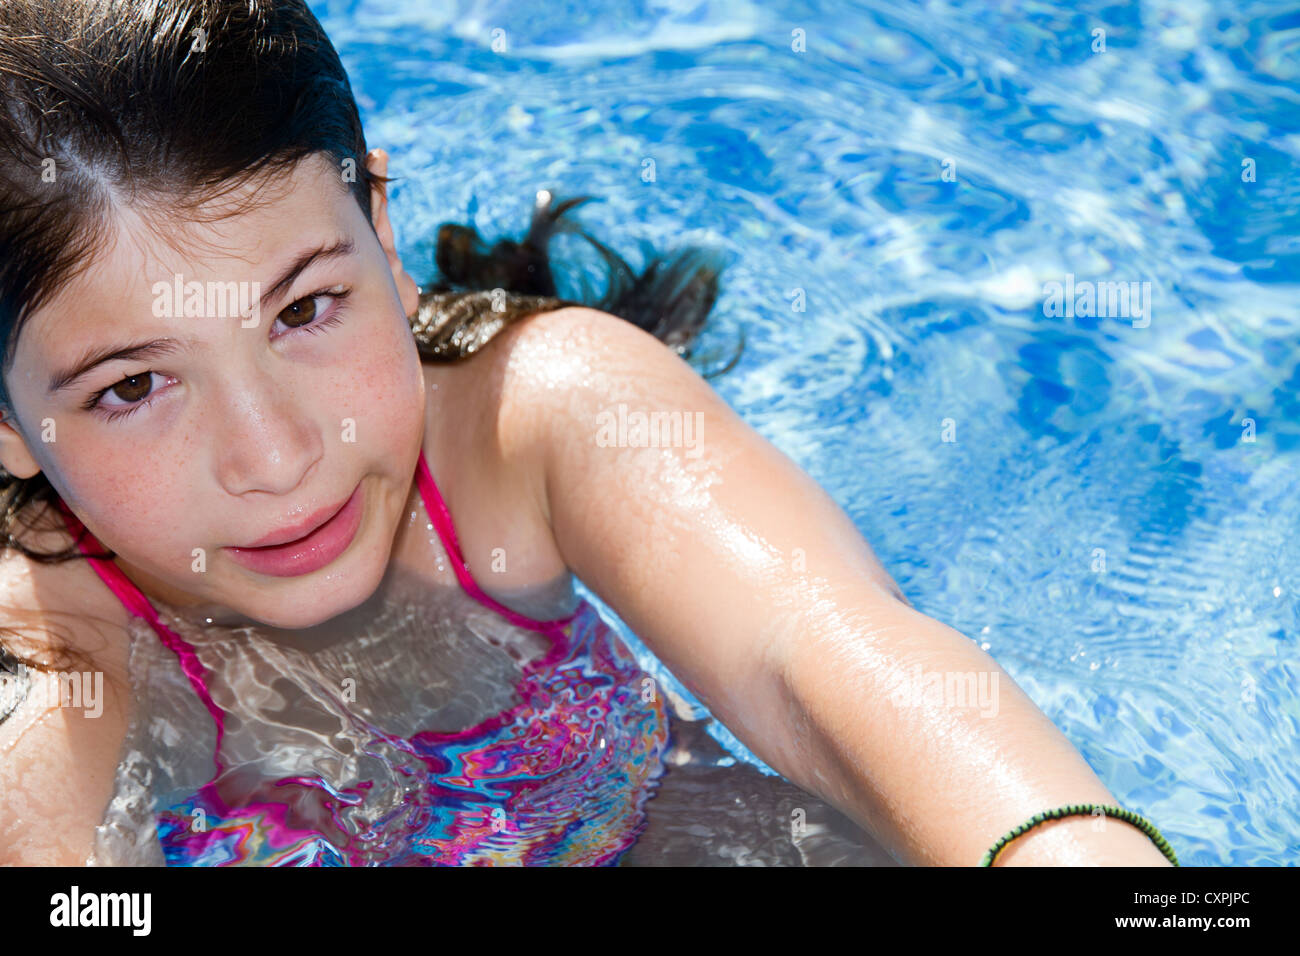 Young Girl Pre Teen Portrait Looking At Camera Swimming In Water Pool